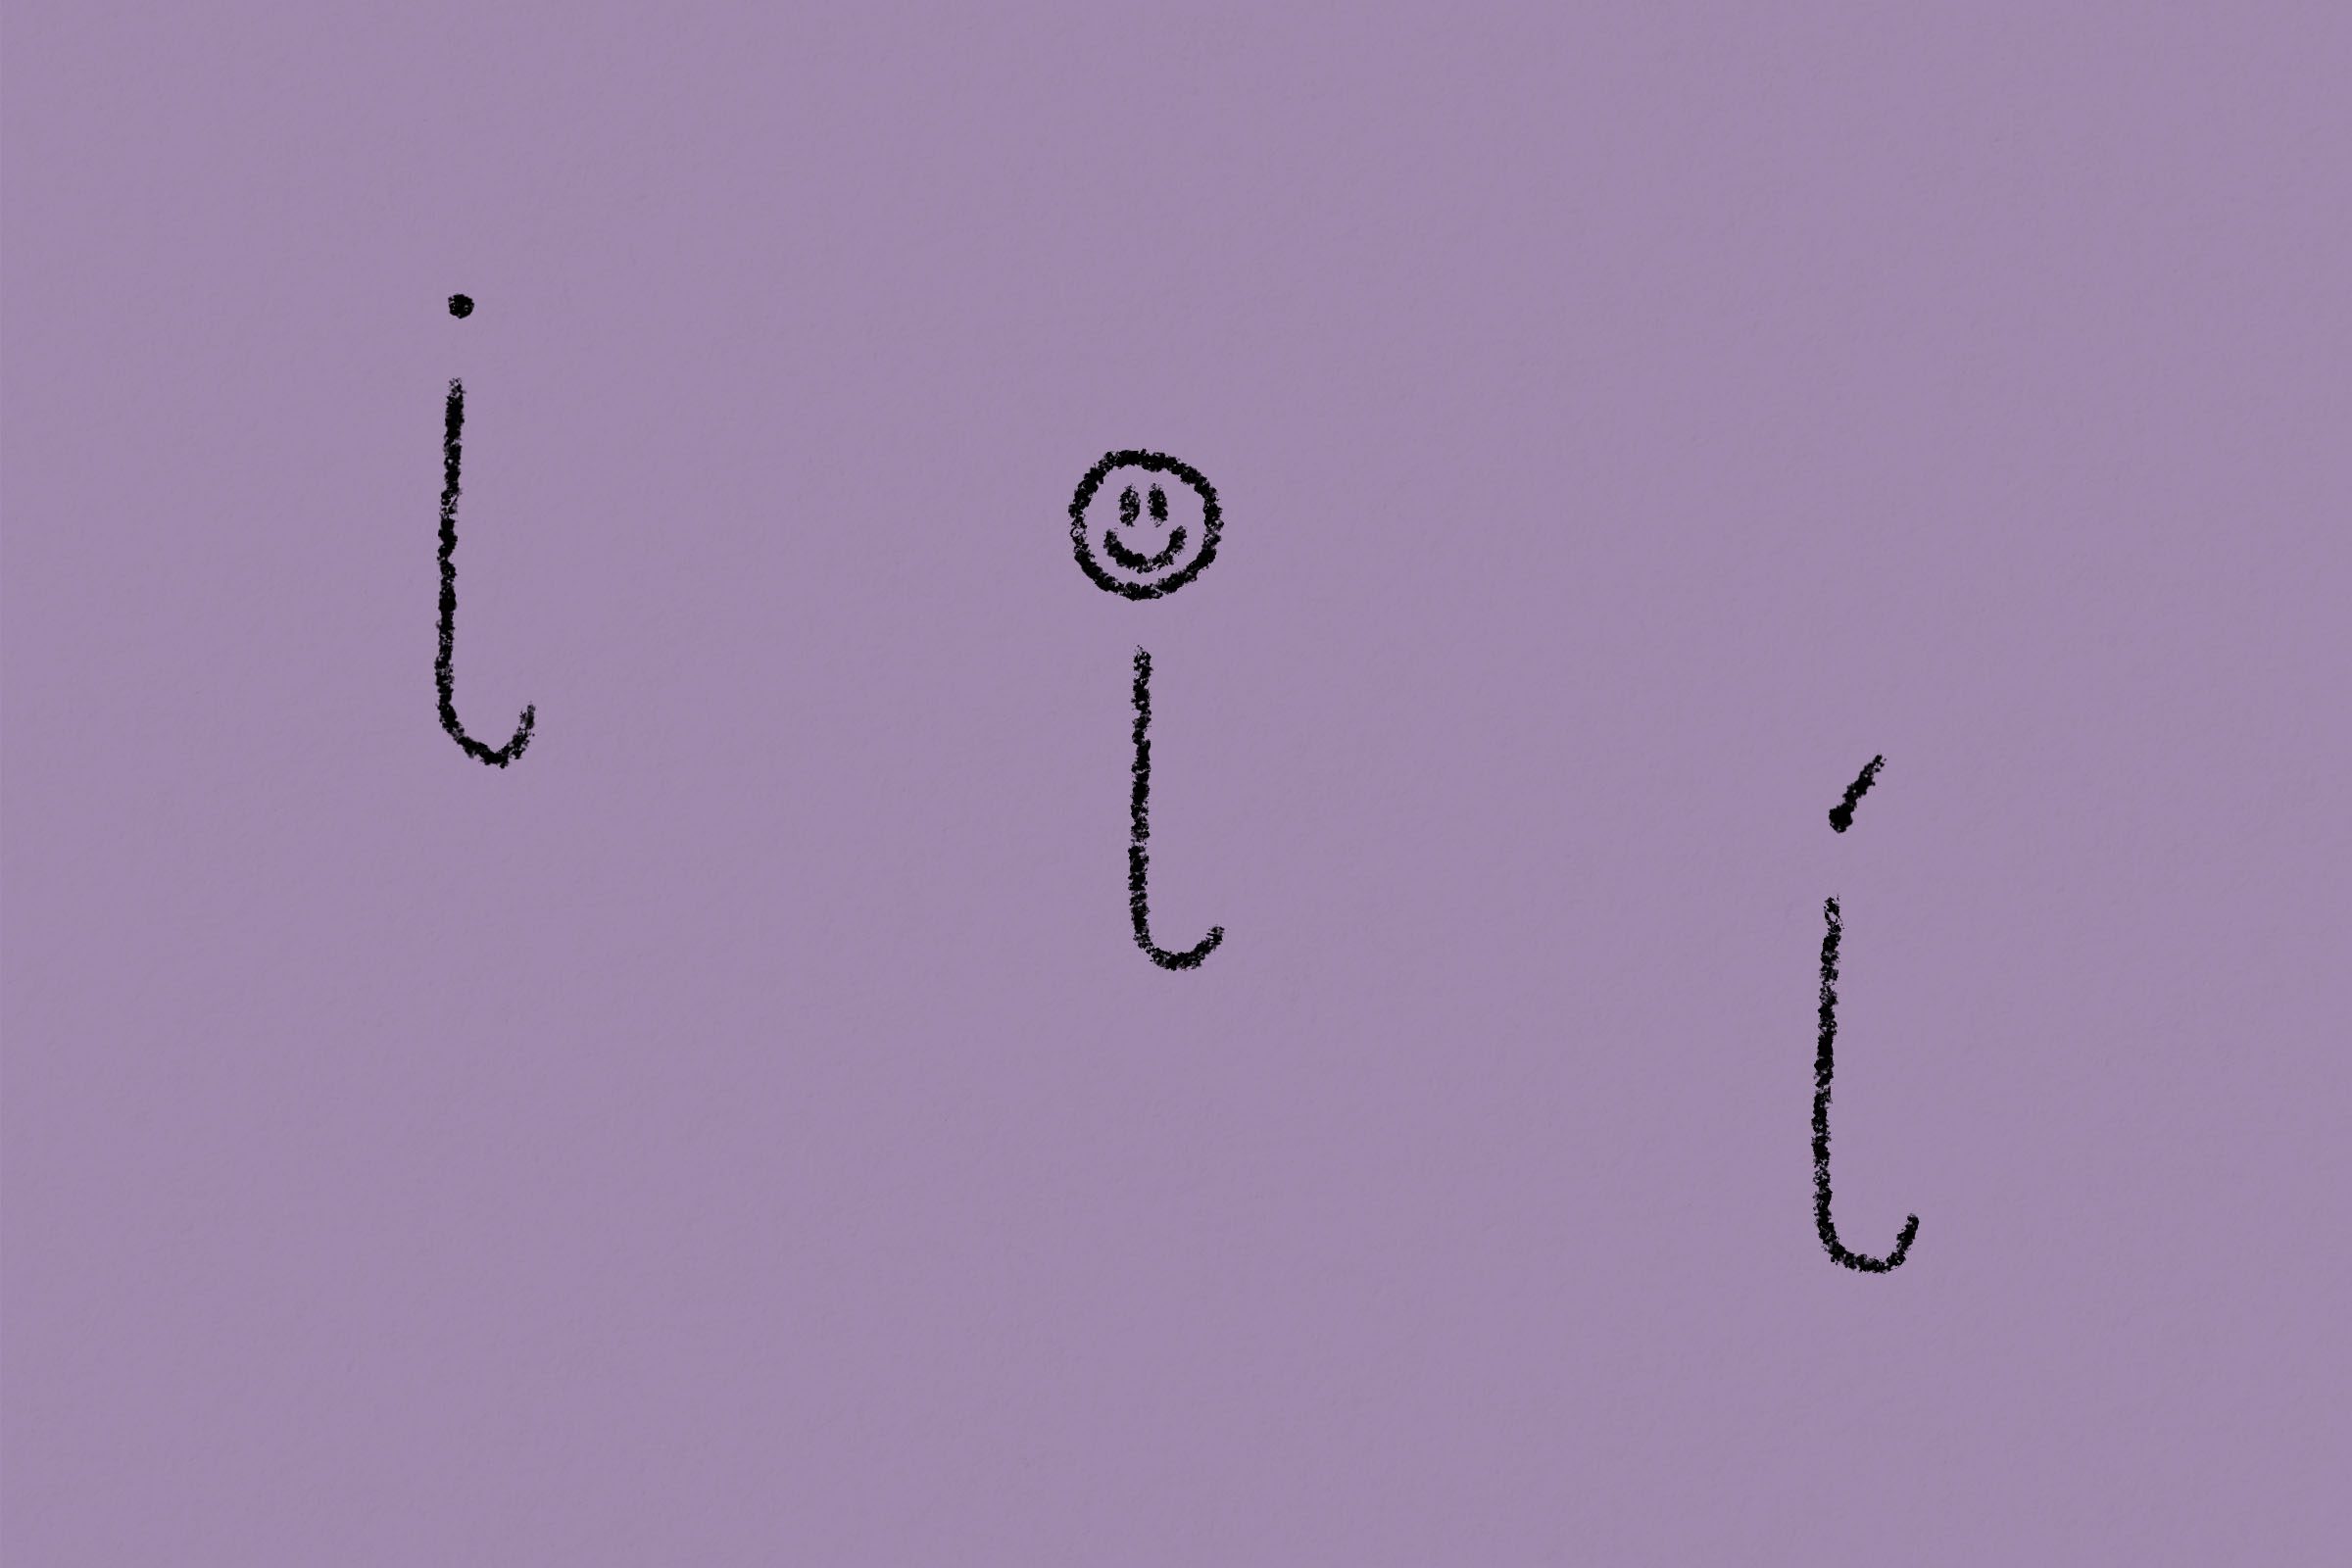 Handwriting showing different ways to dot an "i"